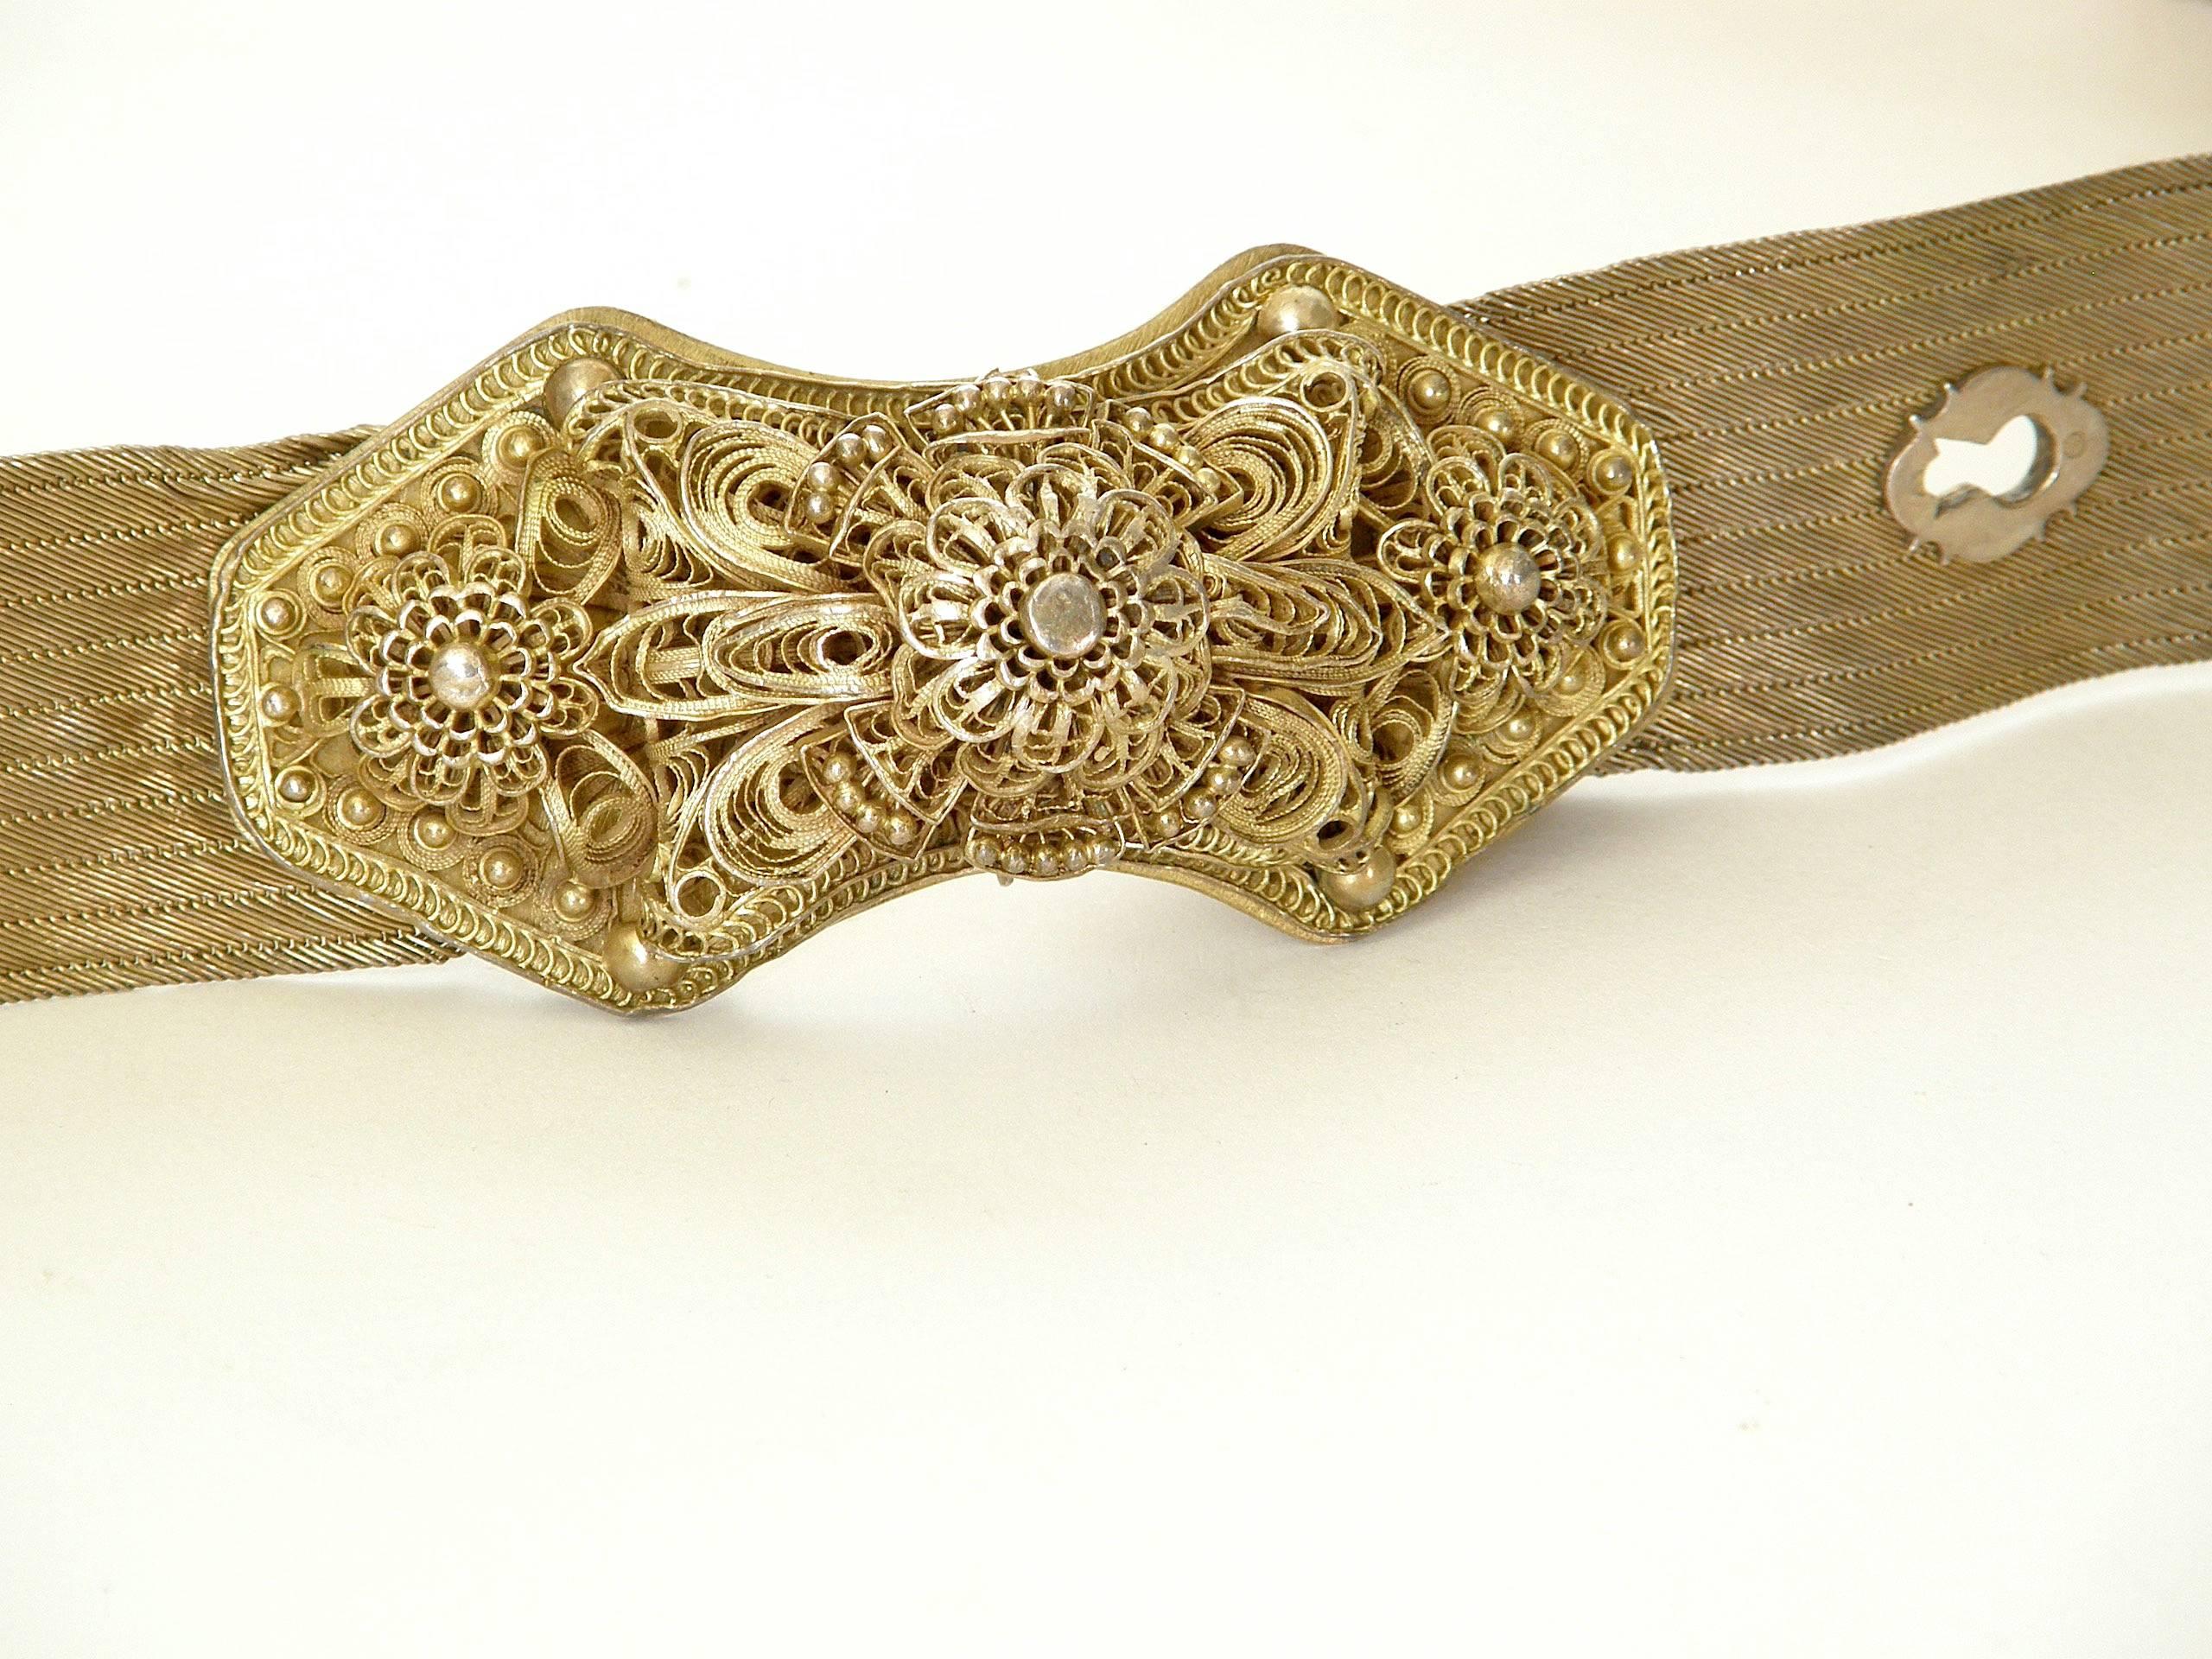 Brown Antique Woven Sterling Mesh Belt with Gold Wash and Elaborate Filigree Buckle For Sale